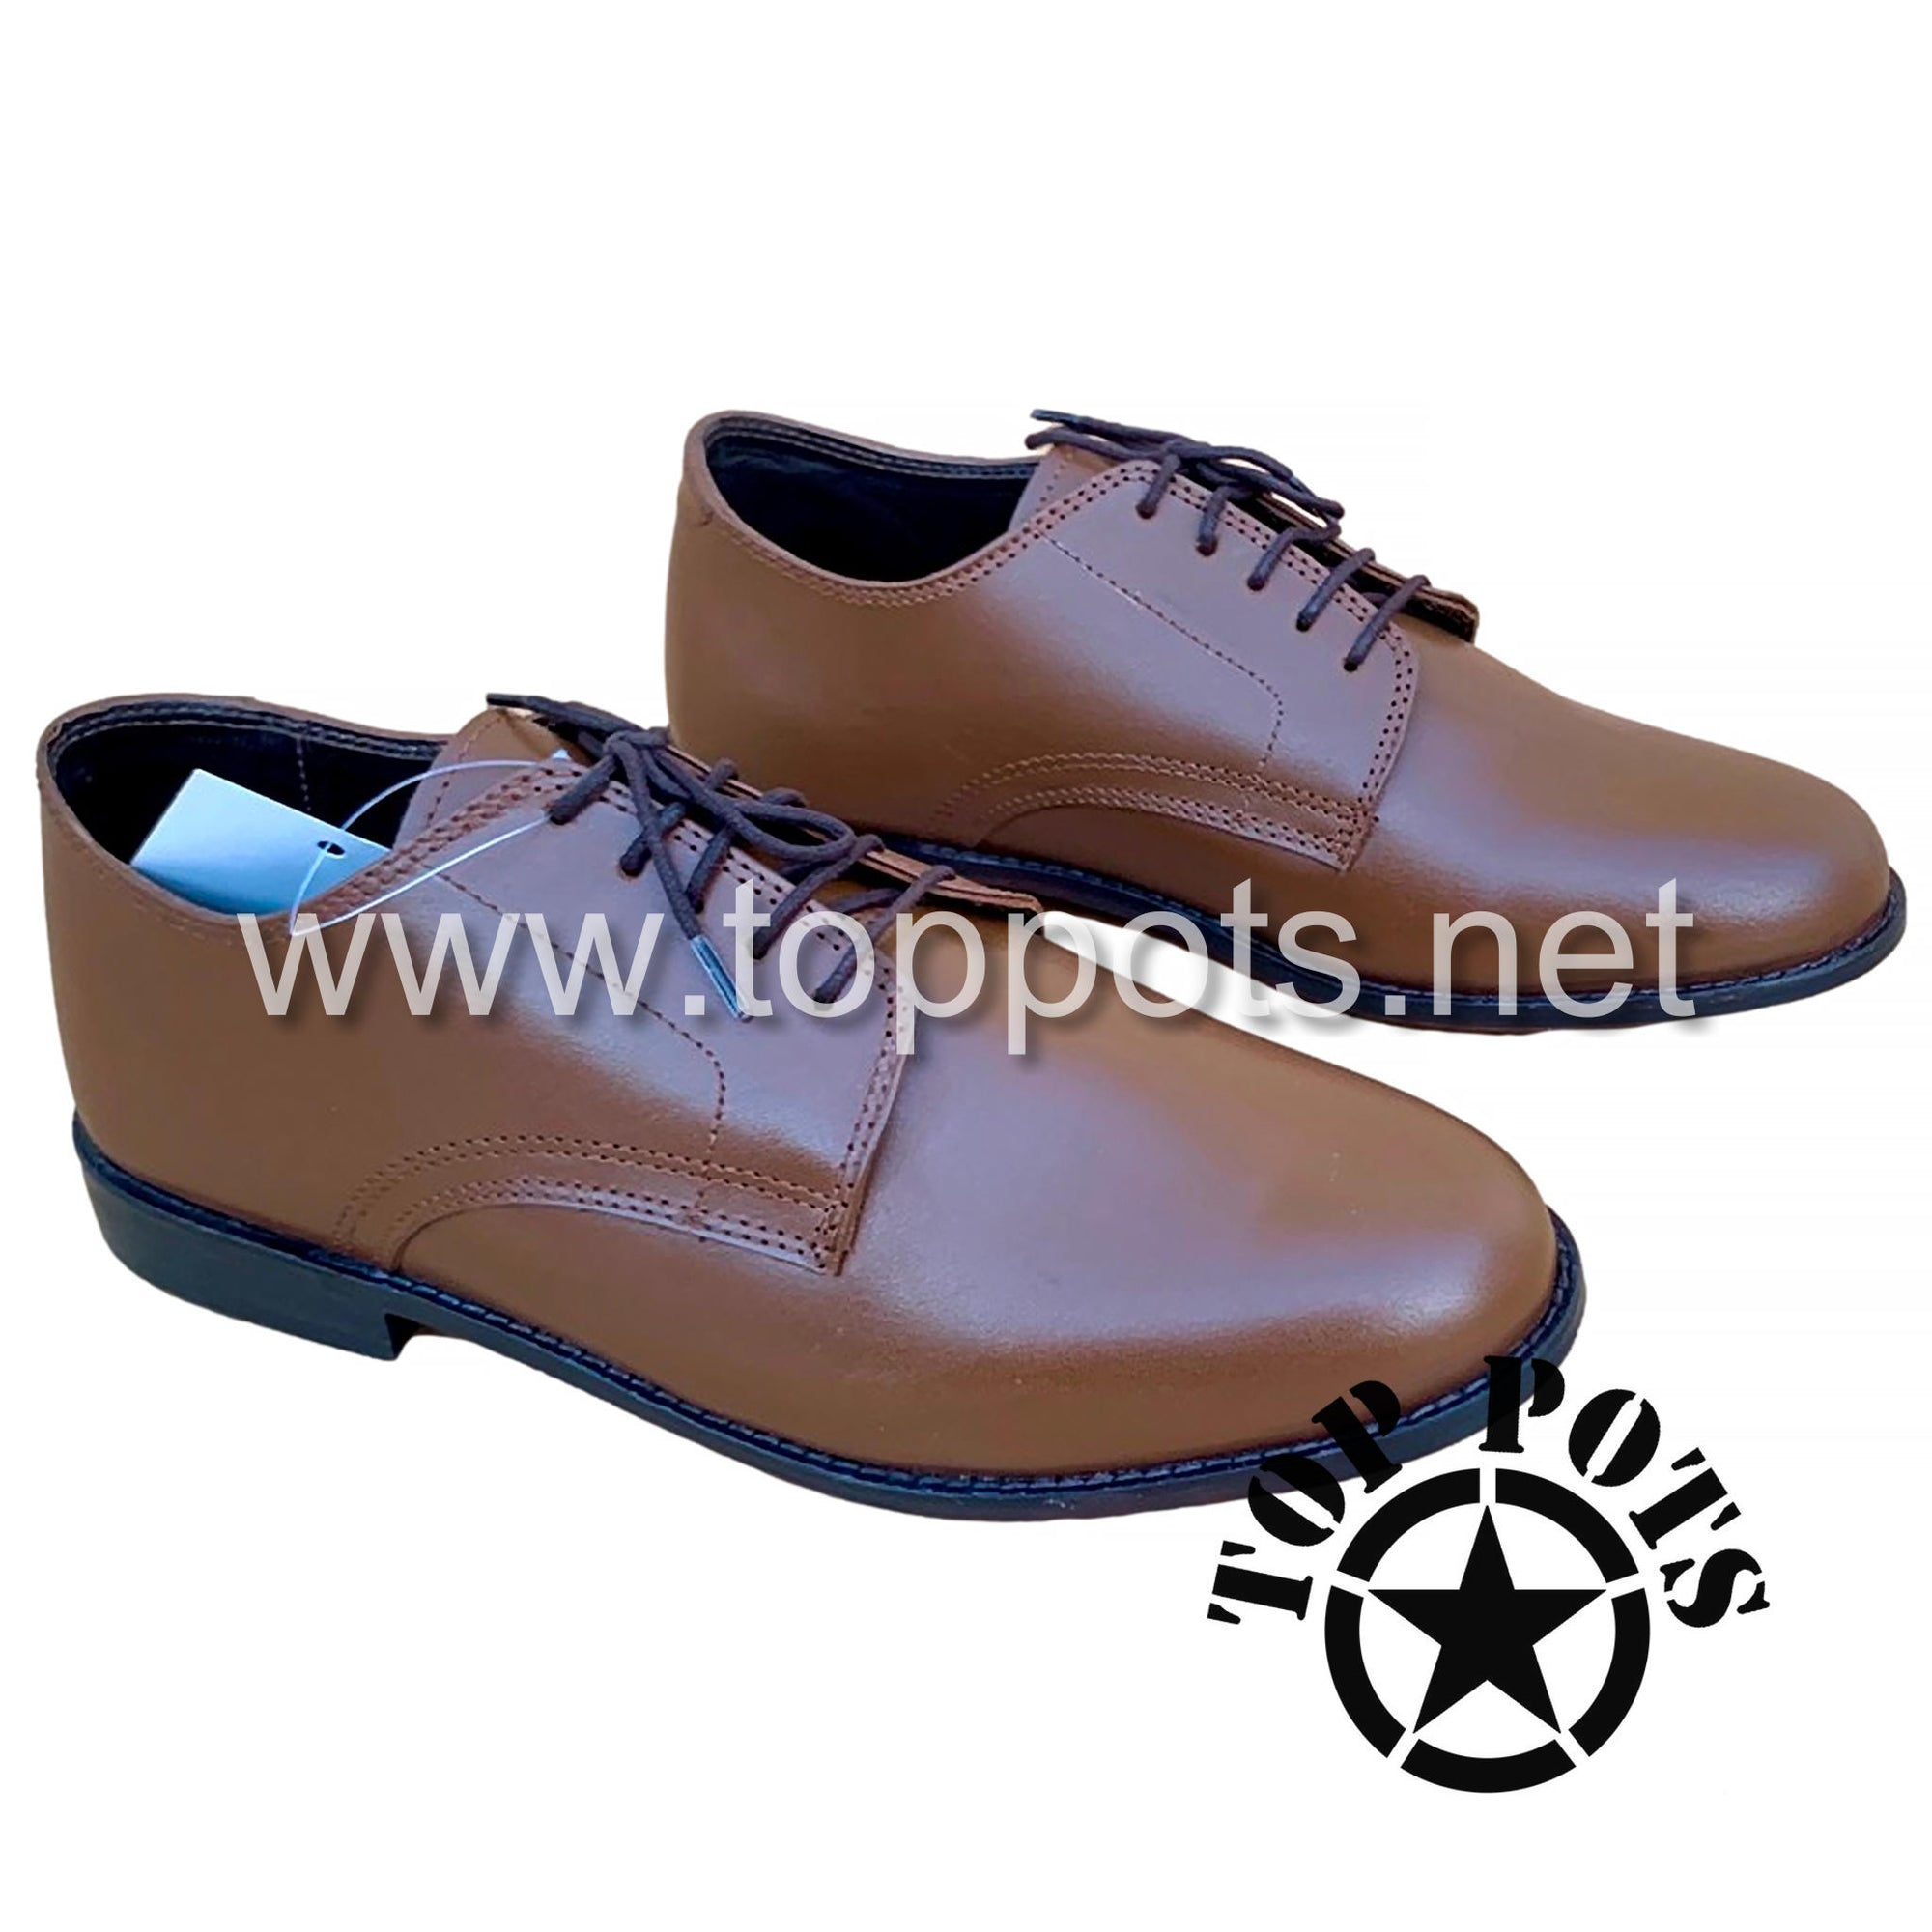 WWII US Army Reproduction Officer Uniform Smooth Leather Russet Brown Service Shoes – High Gloss